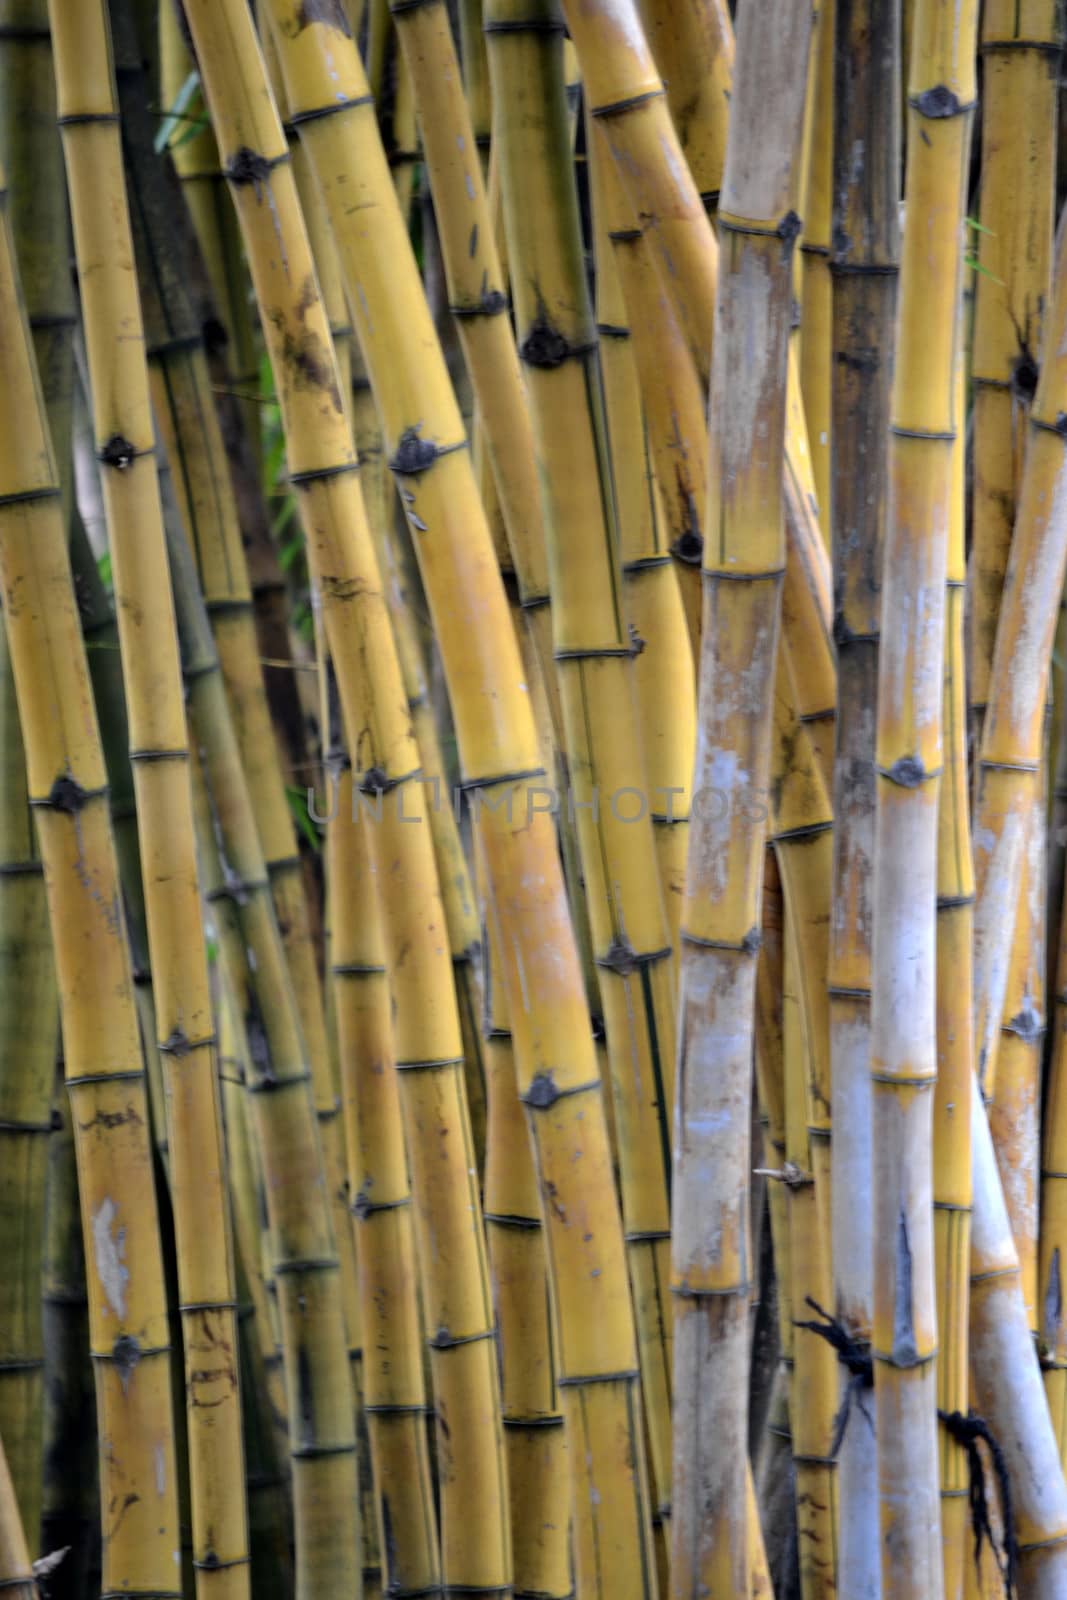 bamboo tree that can be found many in asian countries